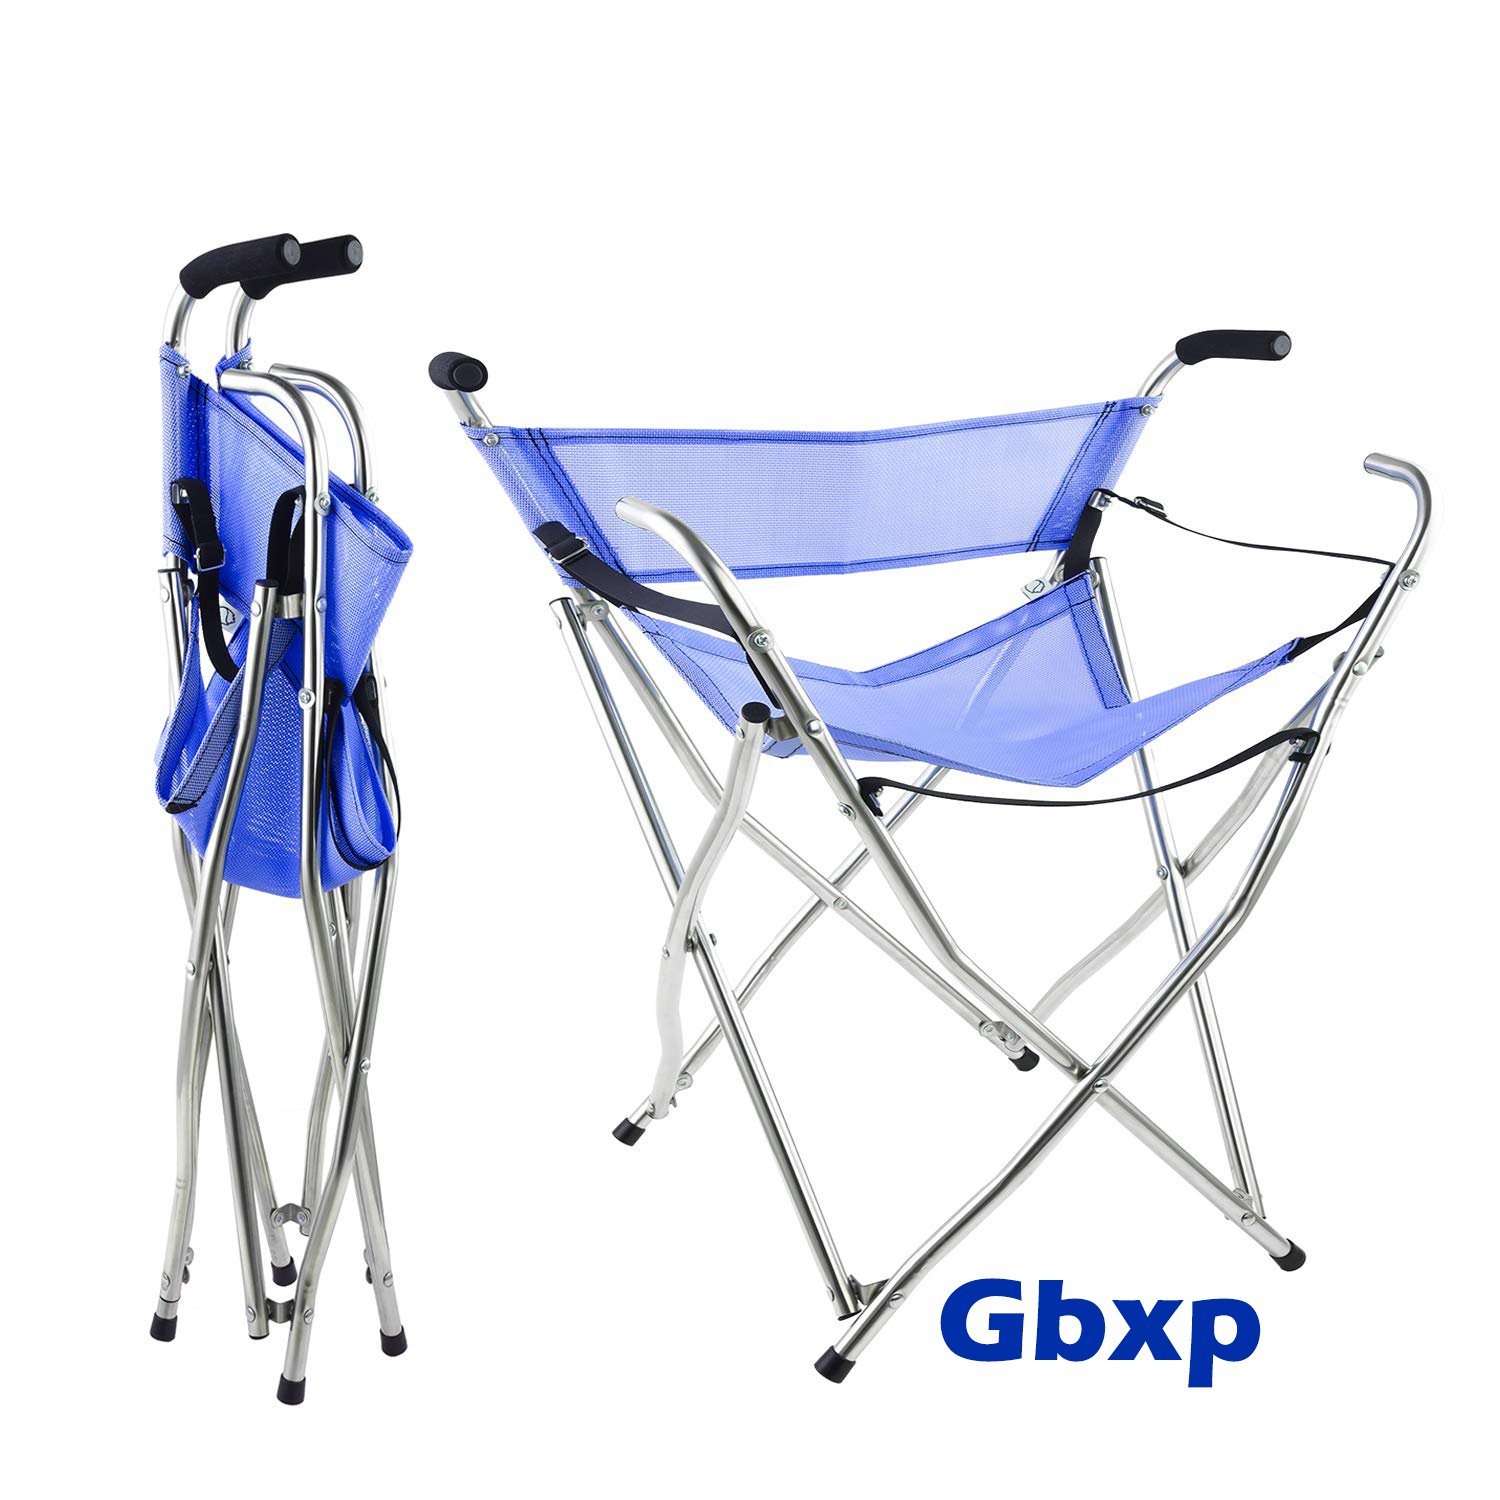 Gbxp Walking Stick Folding Cane Seat for Women/Men with Heavy Duty – Walker Chair Bench Camping Travel Stool 2 Handle with 4 Legs (for Standard Figure)